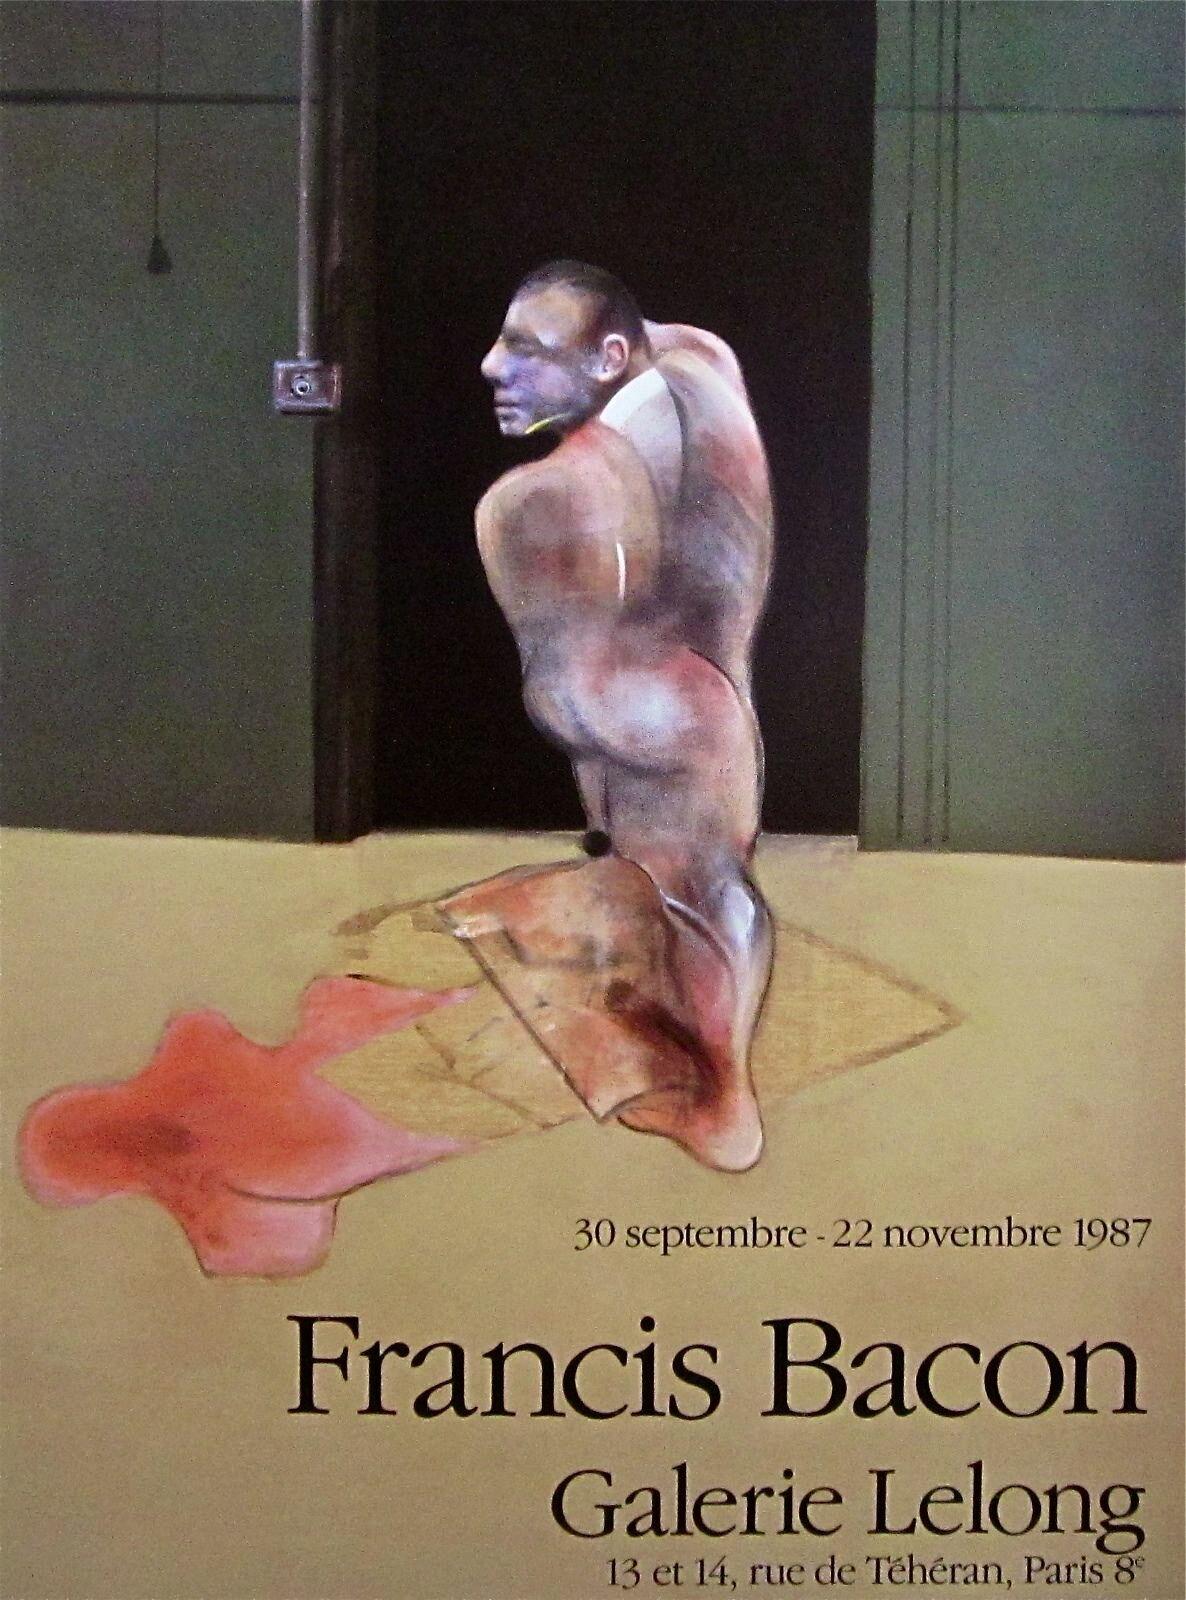 Artist: Francis Bacon (1909-1992)
Title: Standing Man
Year: 1987
Medium: Offset Lithograph on premium paper
Size: 26.25 x 19.75 inches
Condition: Excellent
Notes: Published by Galerie Lelong

FRANCIS BACON (1909-1992) Francis Bacon has a distinctive